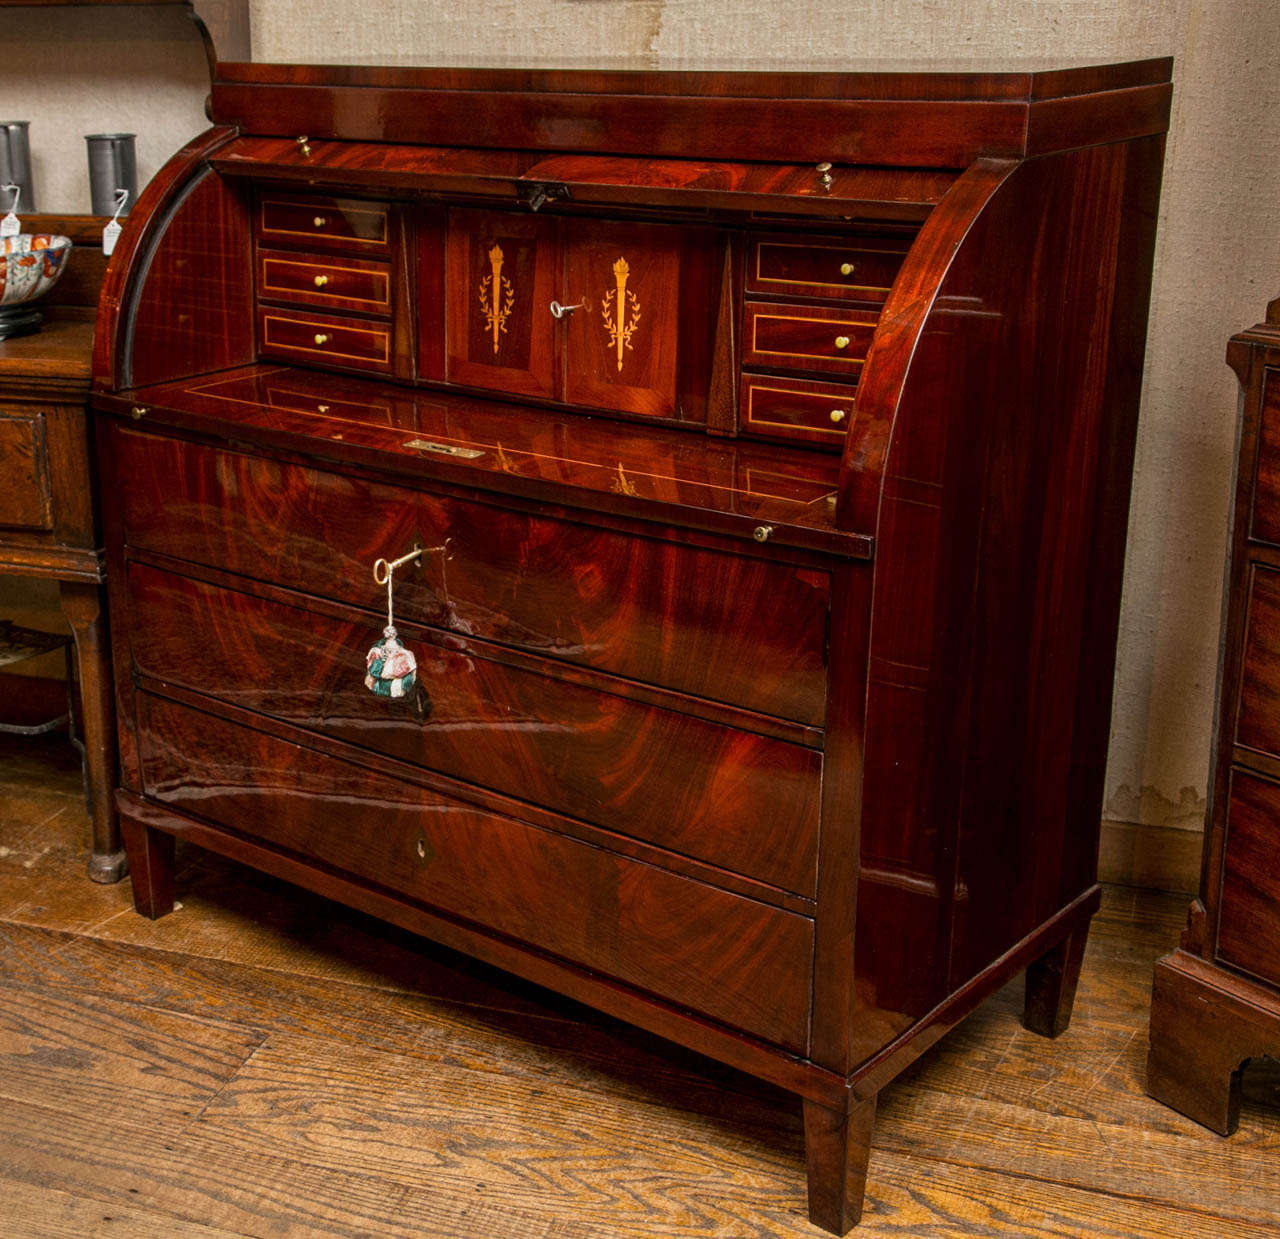 Swathed in a superb cut of flame mahogany veneer, this handsome cylinder desk, with its clean, near-Bedermeier lines would be a stunning addition to any well-appointed home. The bookmatched flame cascades down the entire front of this case down the